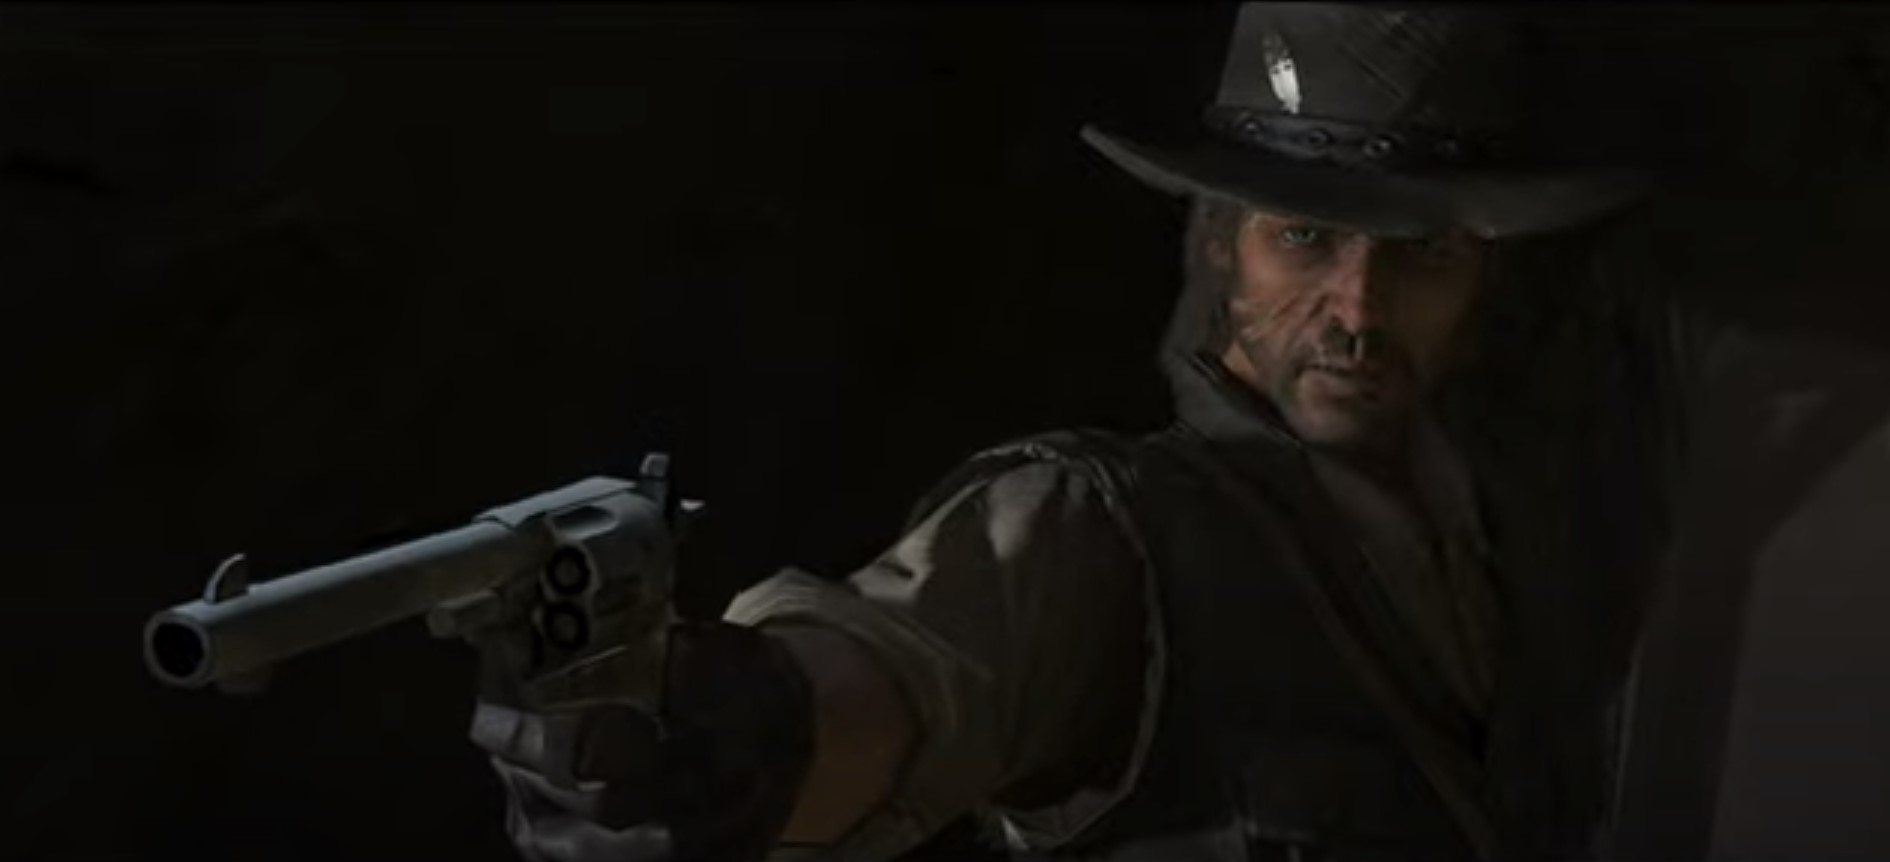 Red Dead Redemption Announced For PS4, Digital Release Due August